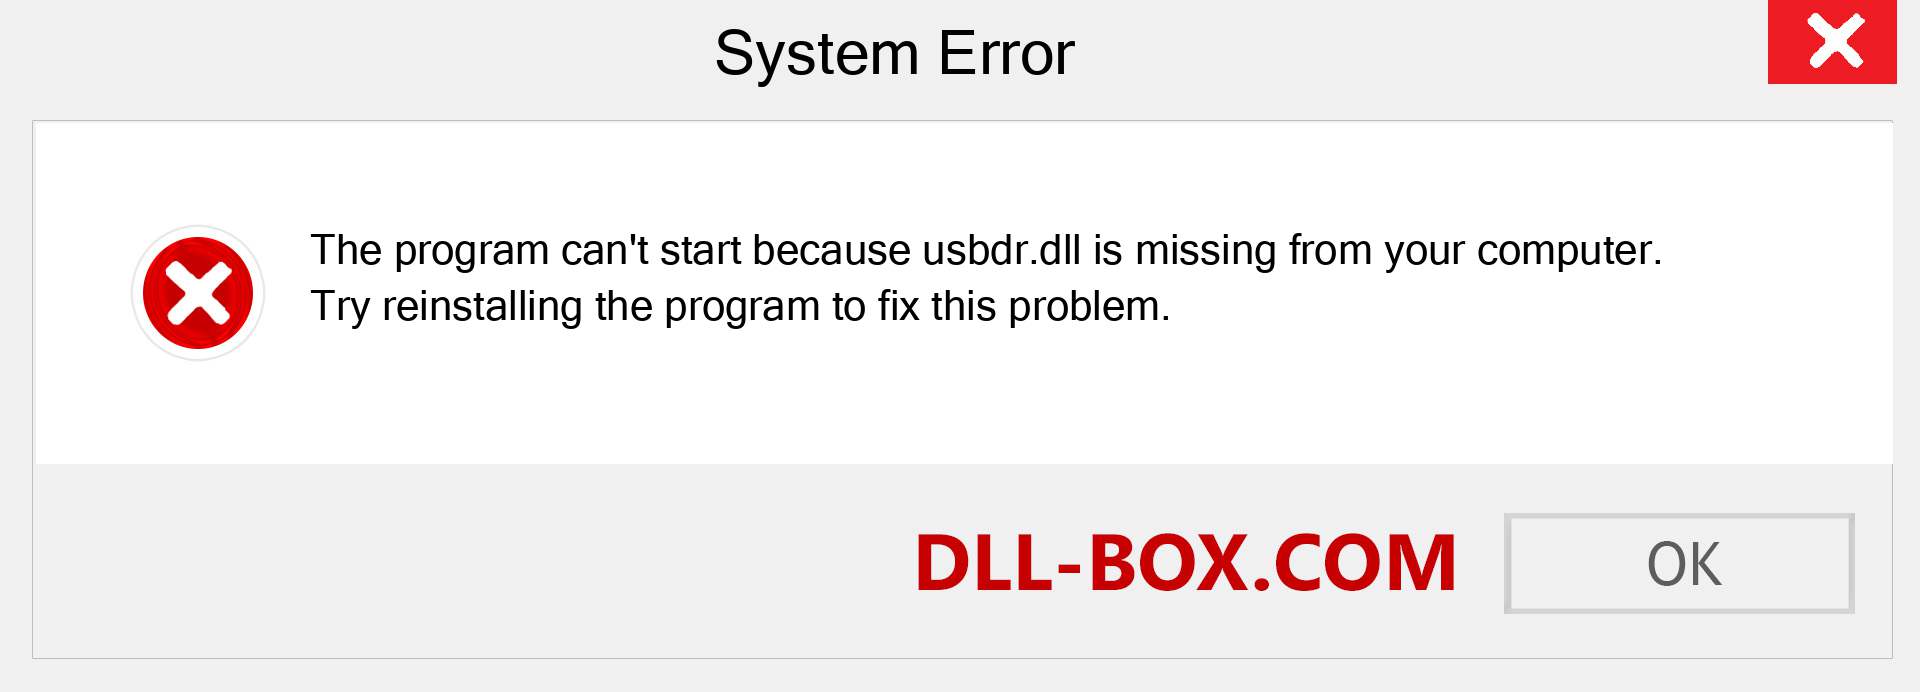  usbdr.dll file is missing?. Download for Windows 7, 8, 10 - Fix  usbdr dll Missing Error on Windows, photos, images